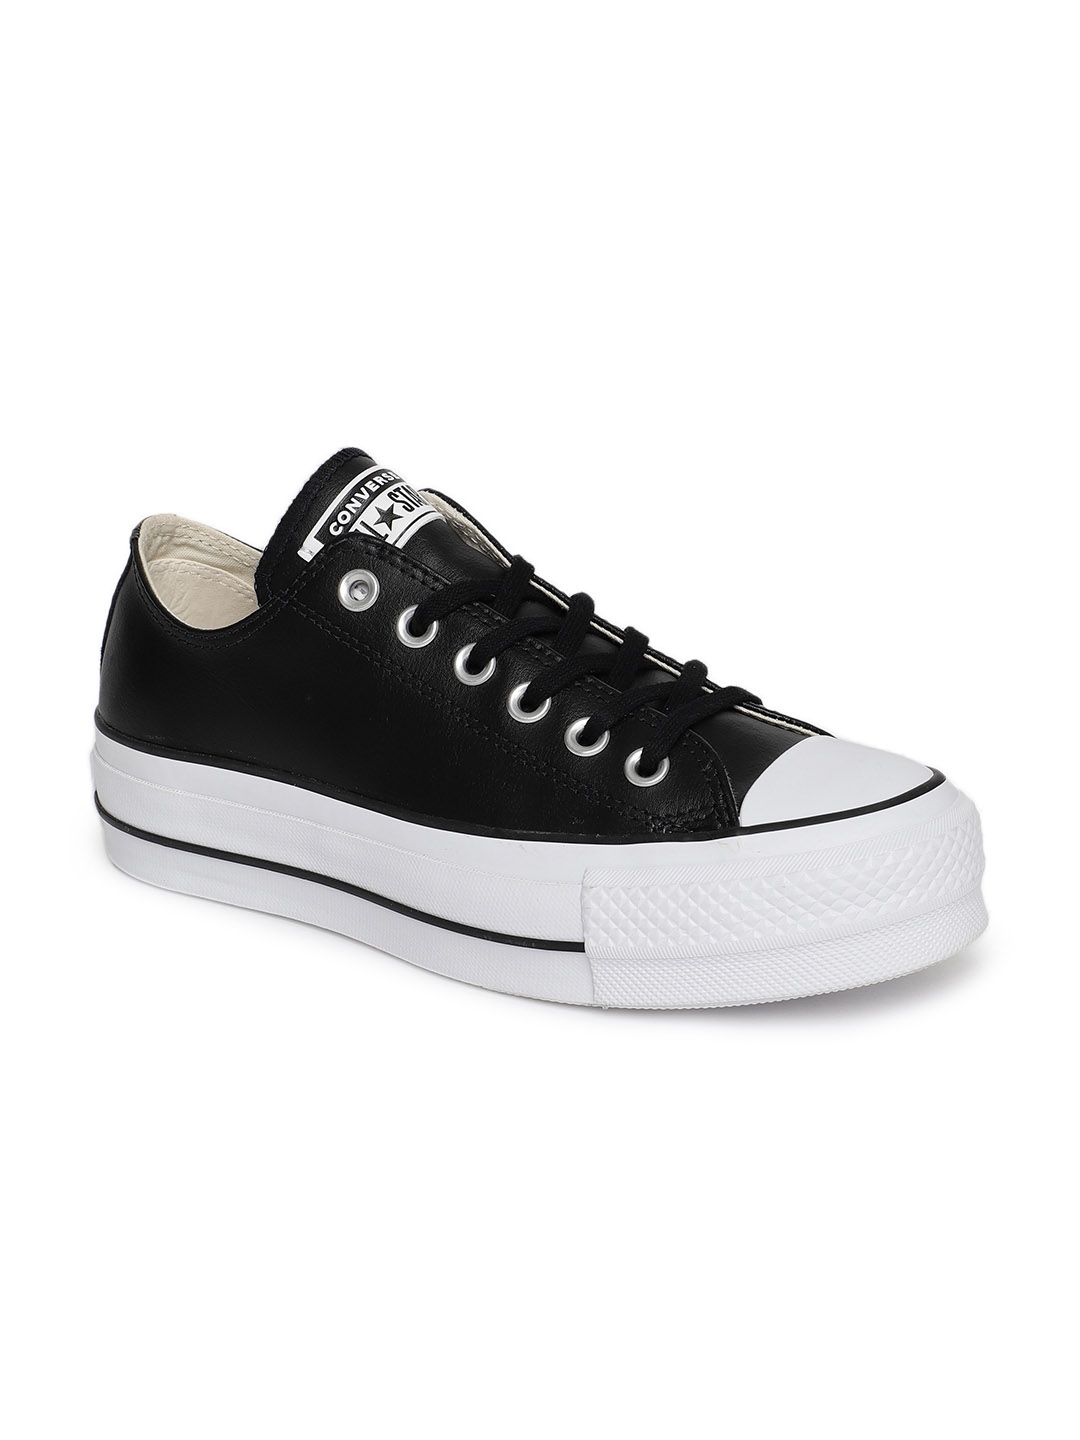 Buy Converse Leather Chuck Taylor All Star Lift Black 561681C Leather ...